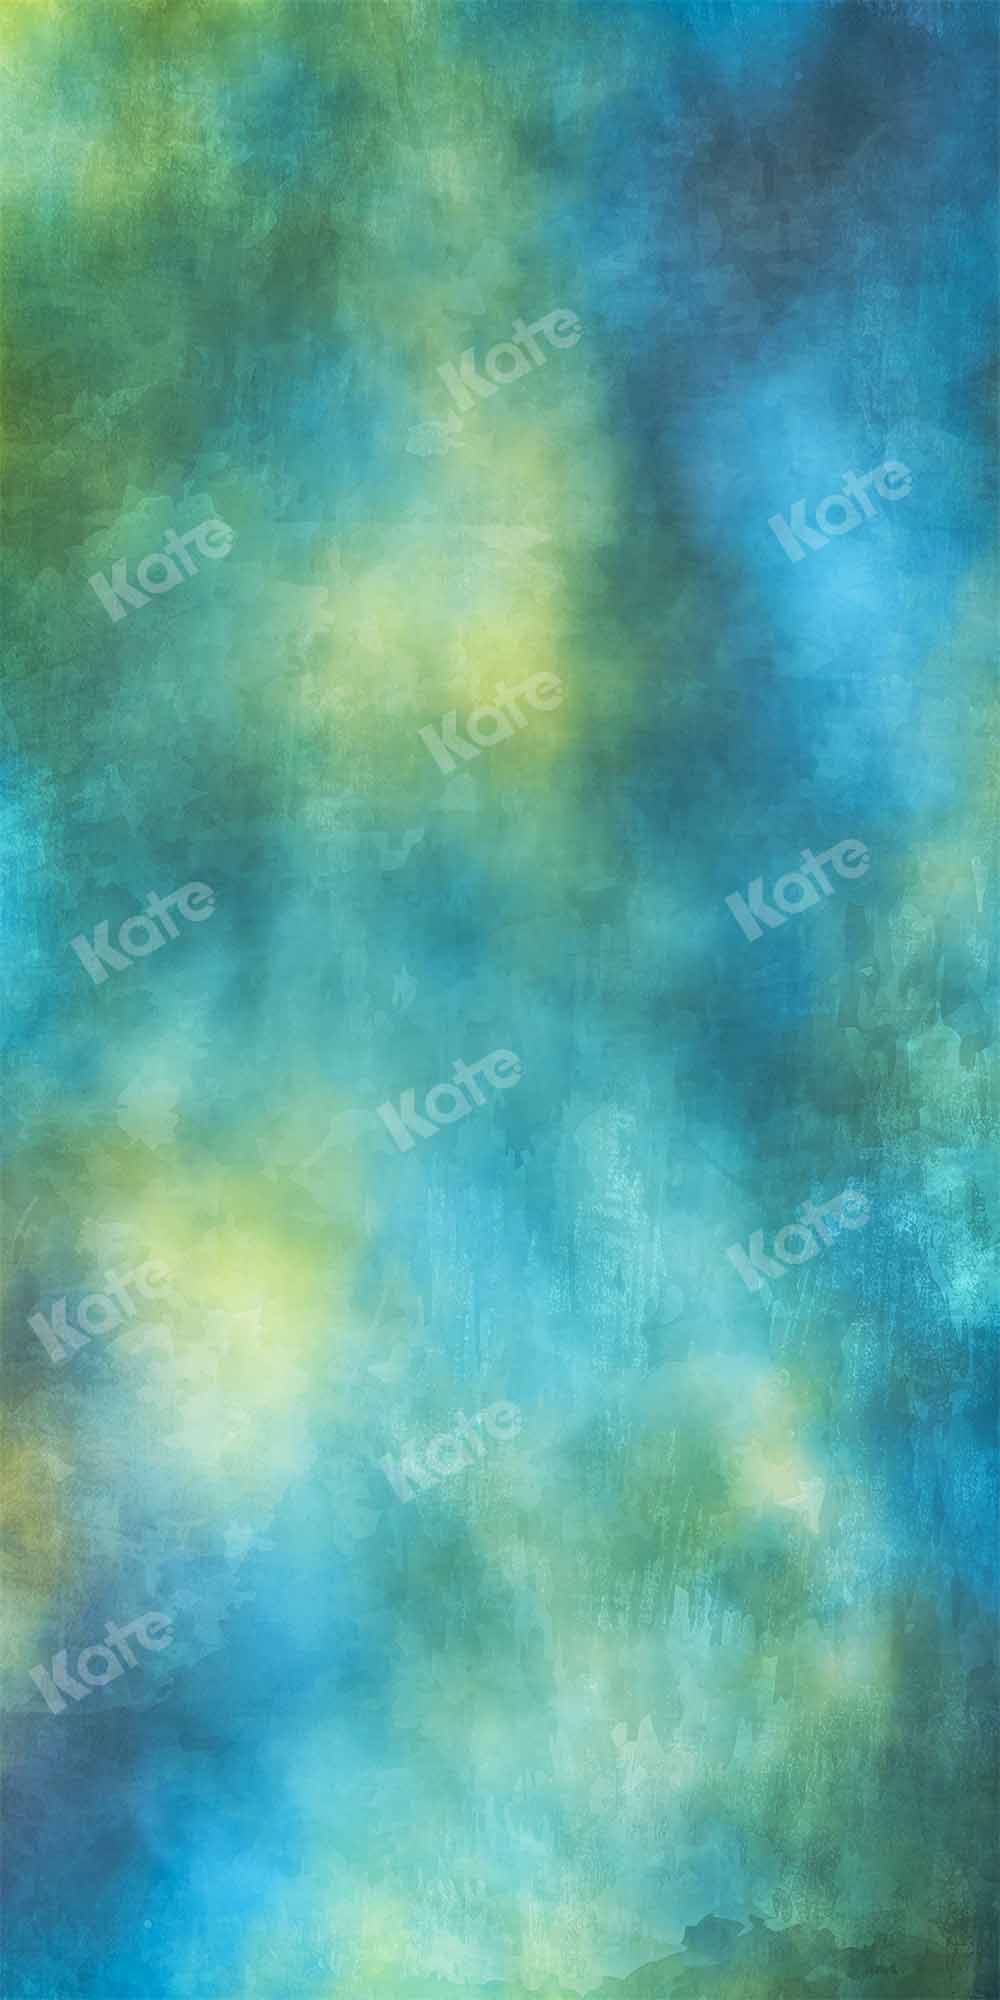 Kate Blue-green Backdrop Abstract Texture Designed by Kate Image